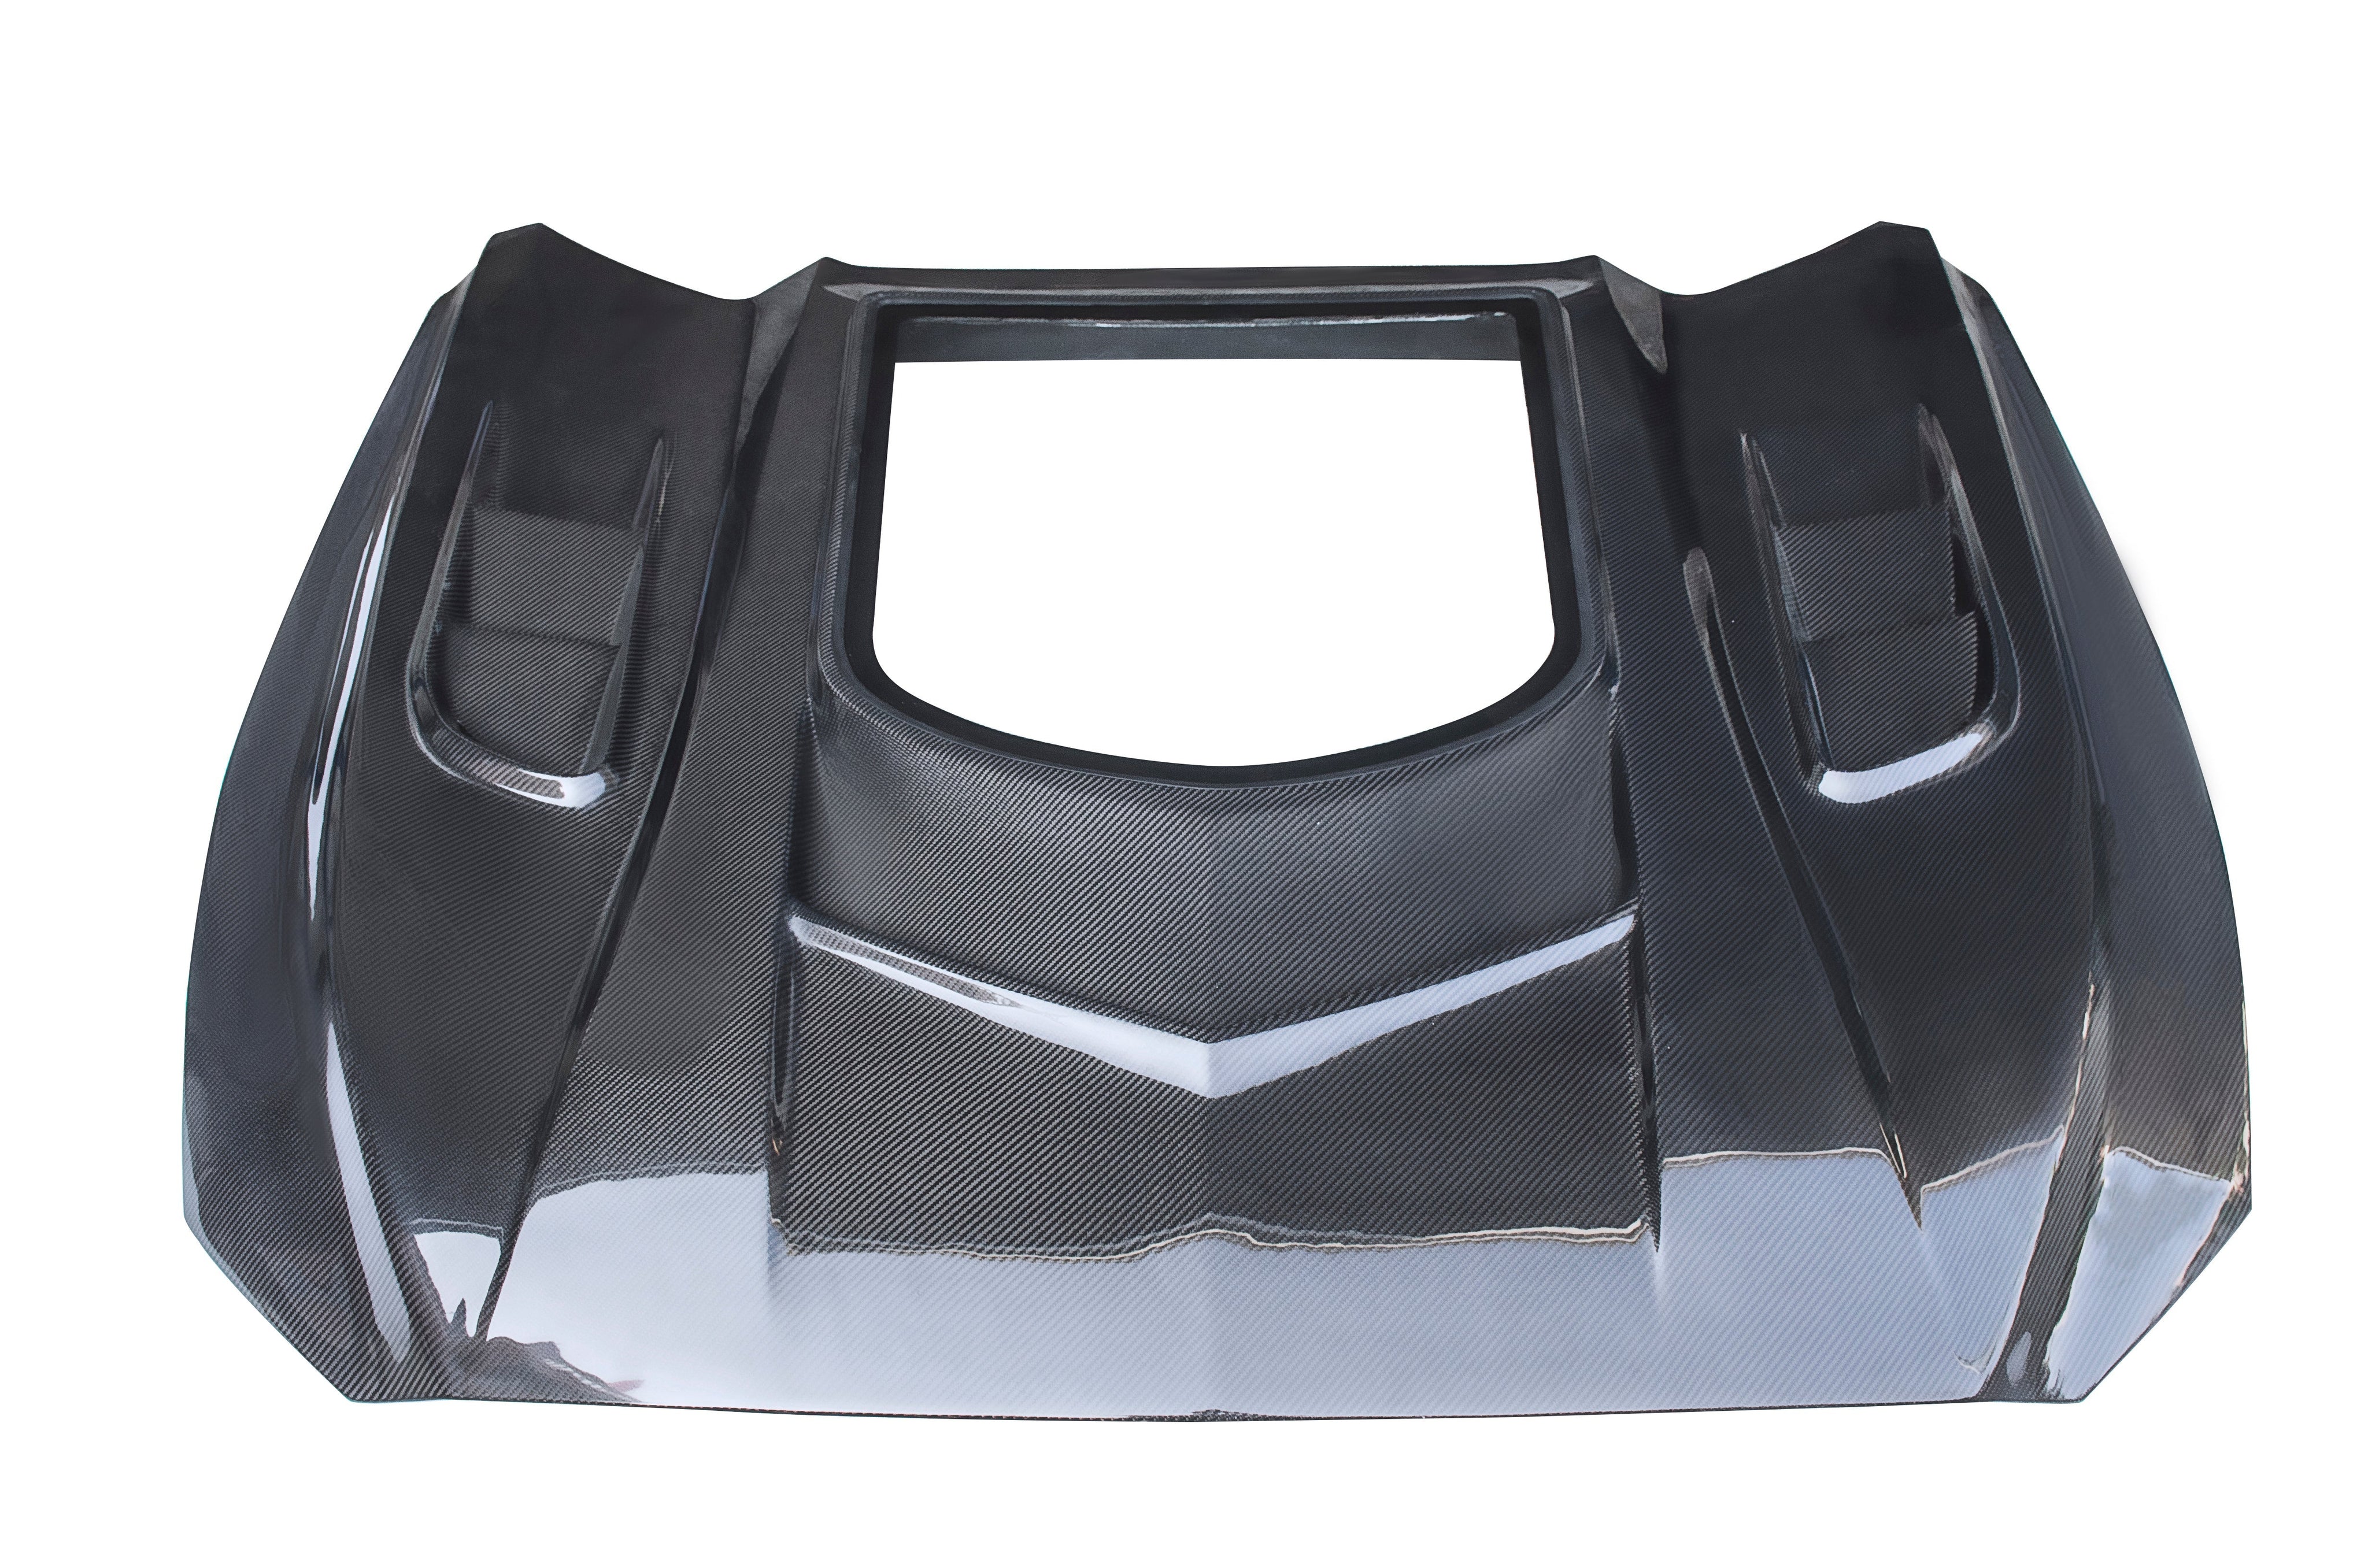 CMST Carbon Fiber Glass Transparent Hood Stage 2 ( Raised 2 inches ) for Ford Mustang S550.1 2015- 2017